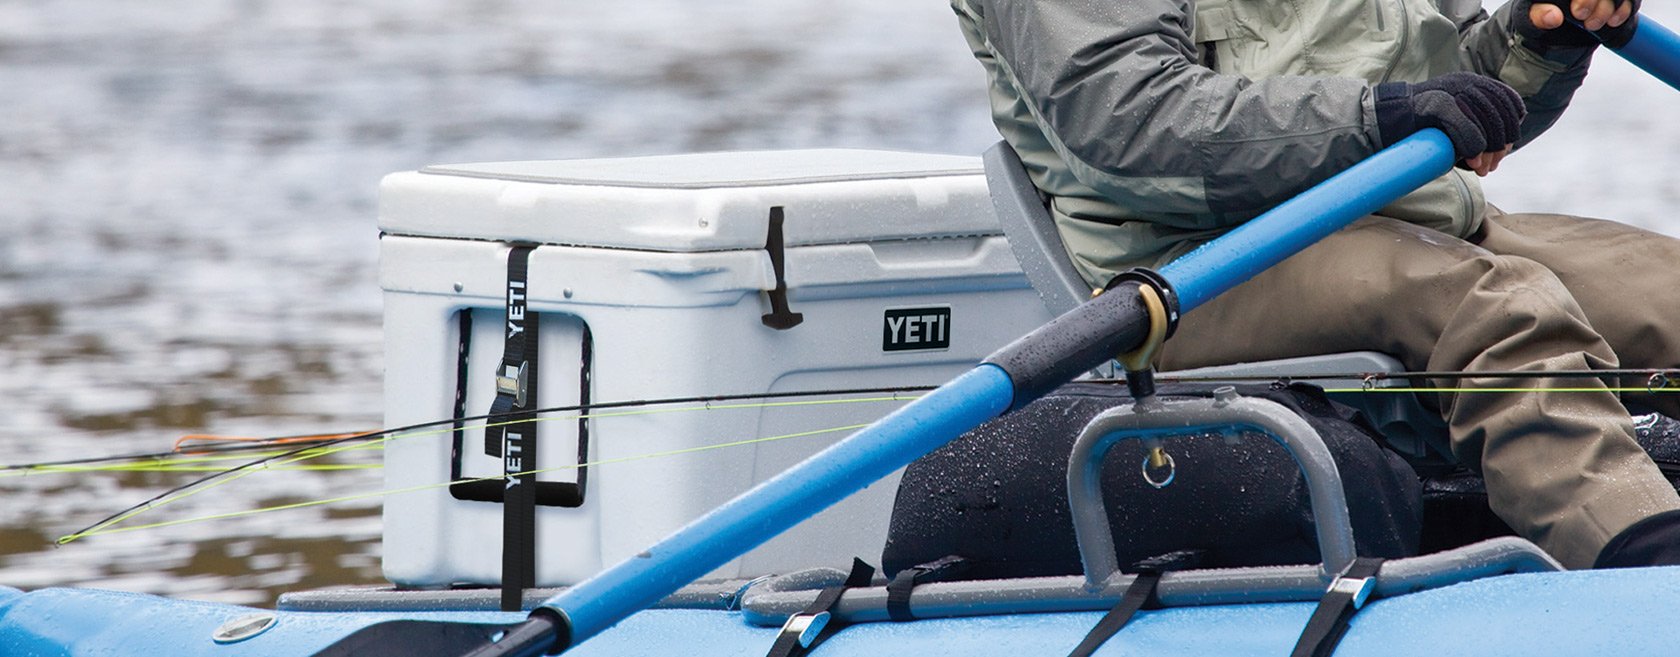 Tie-Down Kit for Yeti Hard Coolers